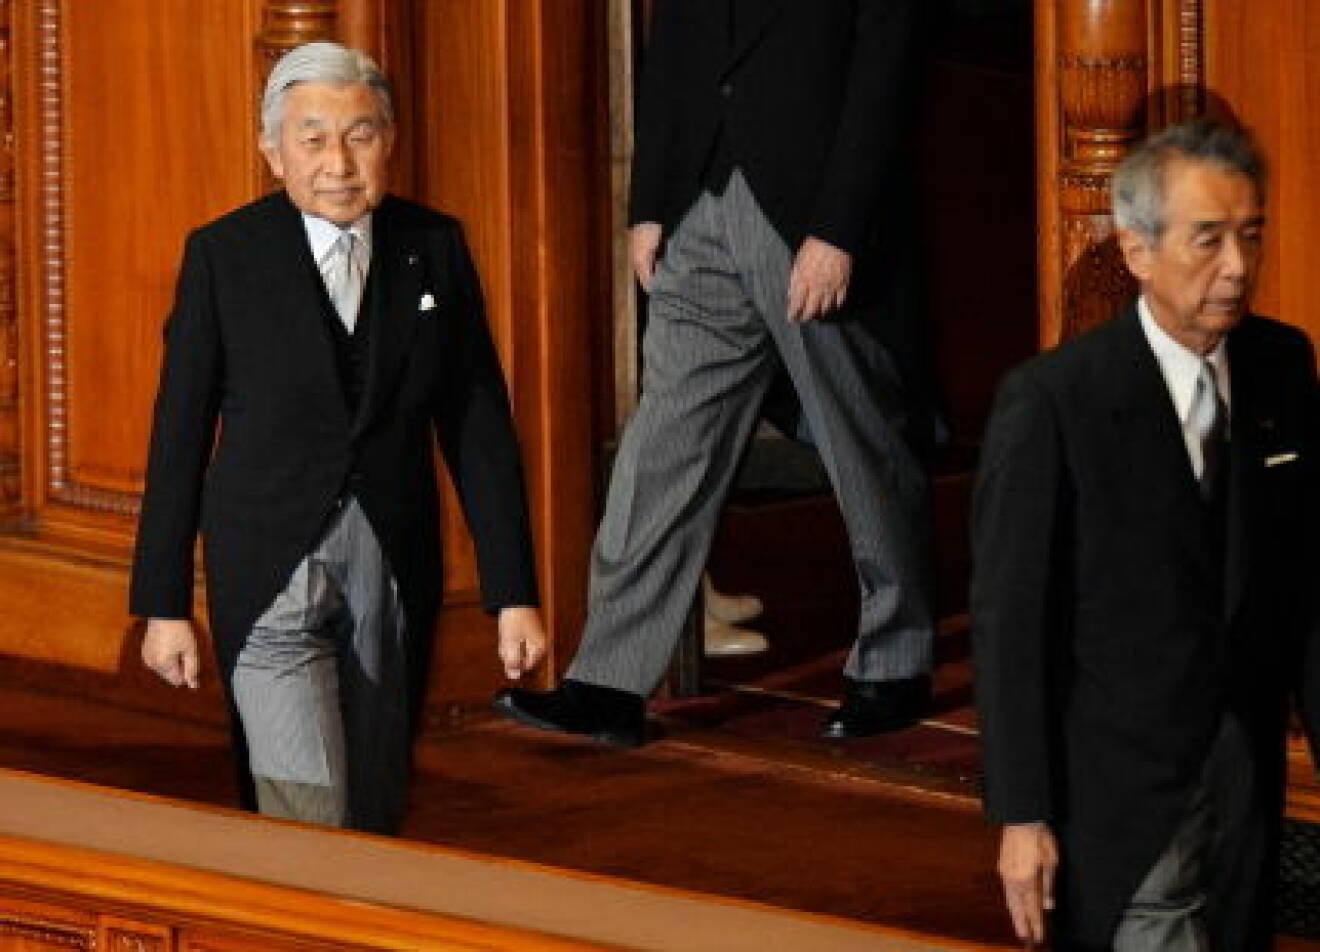 187th Extraordinary Diet session begins in Japan